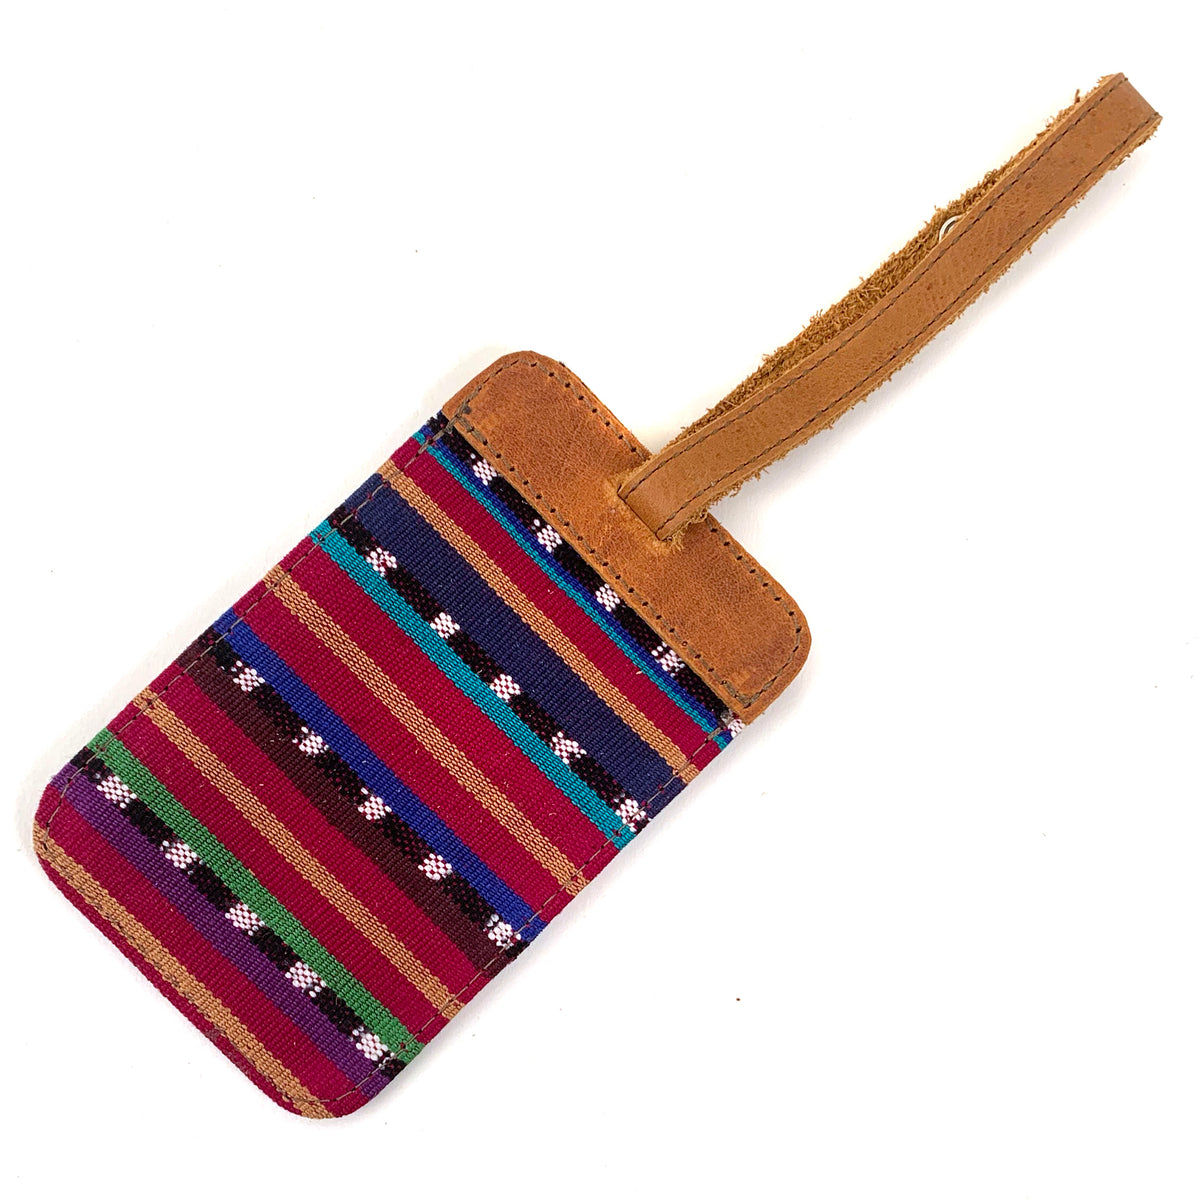 Handwoven Luggage Tag with Leather Trim | Mayan Hands